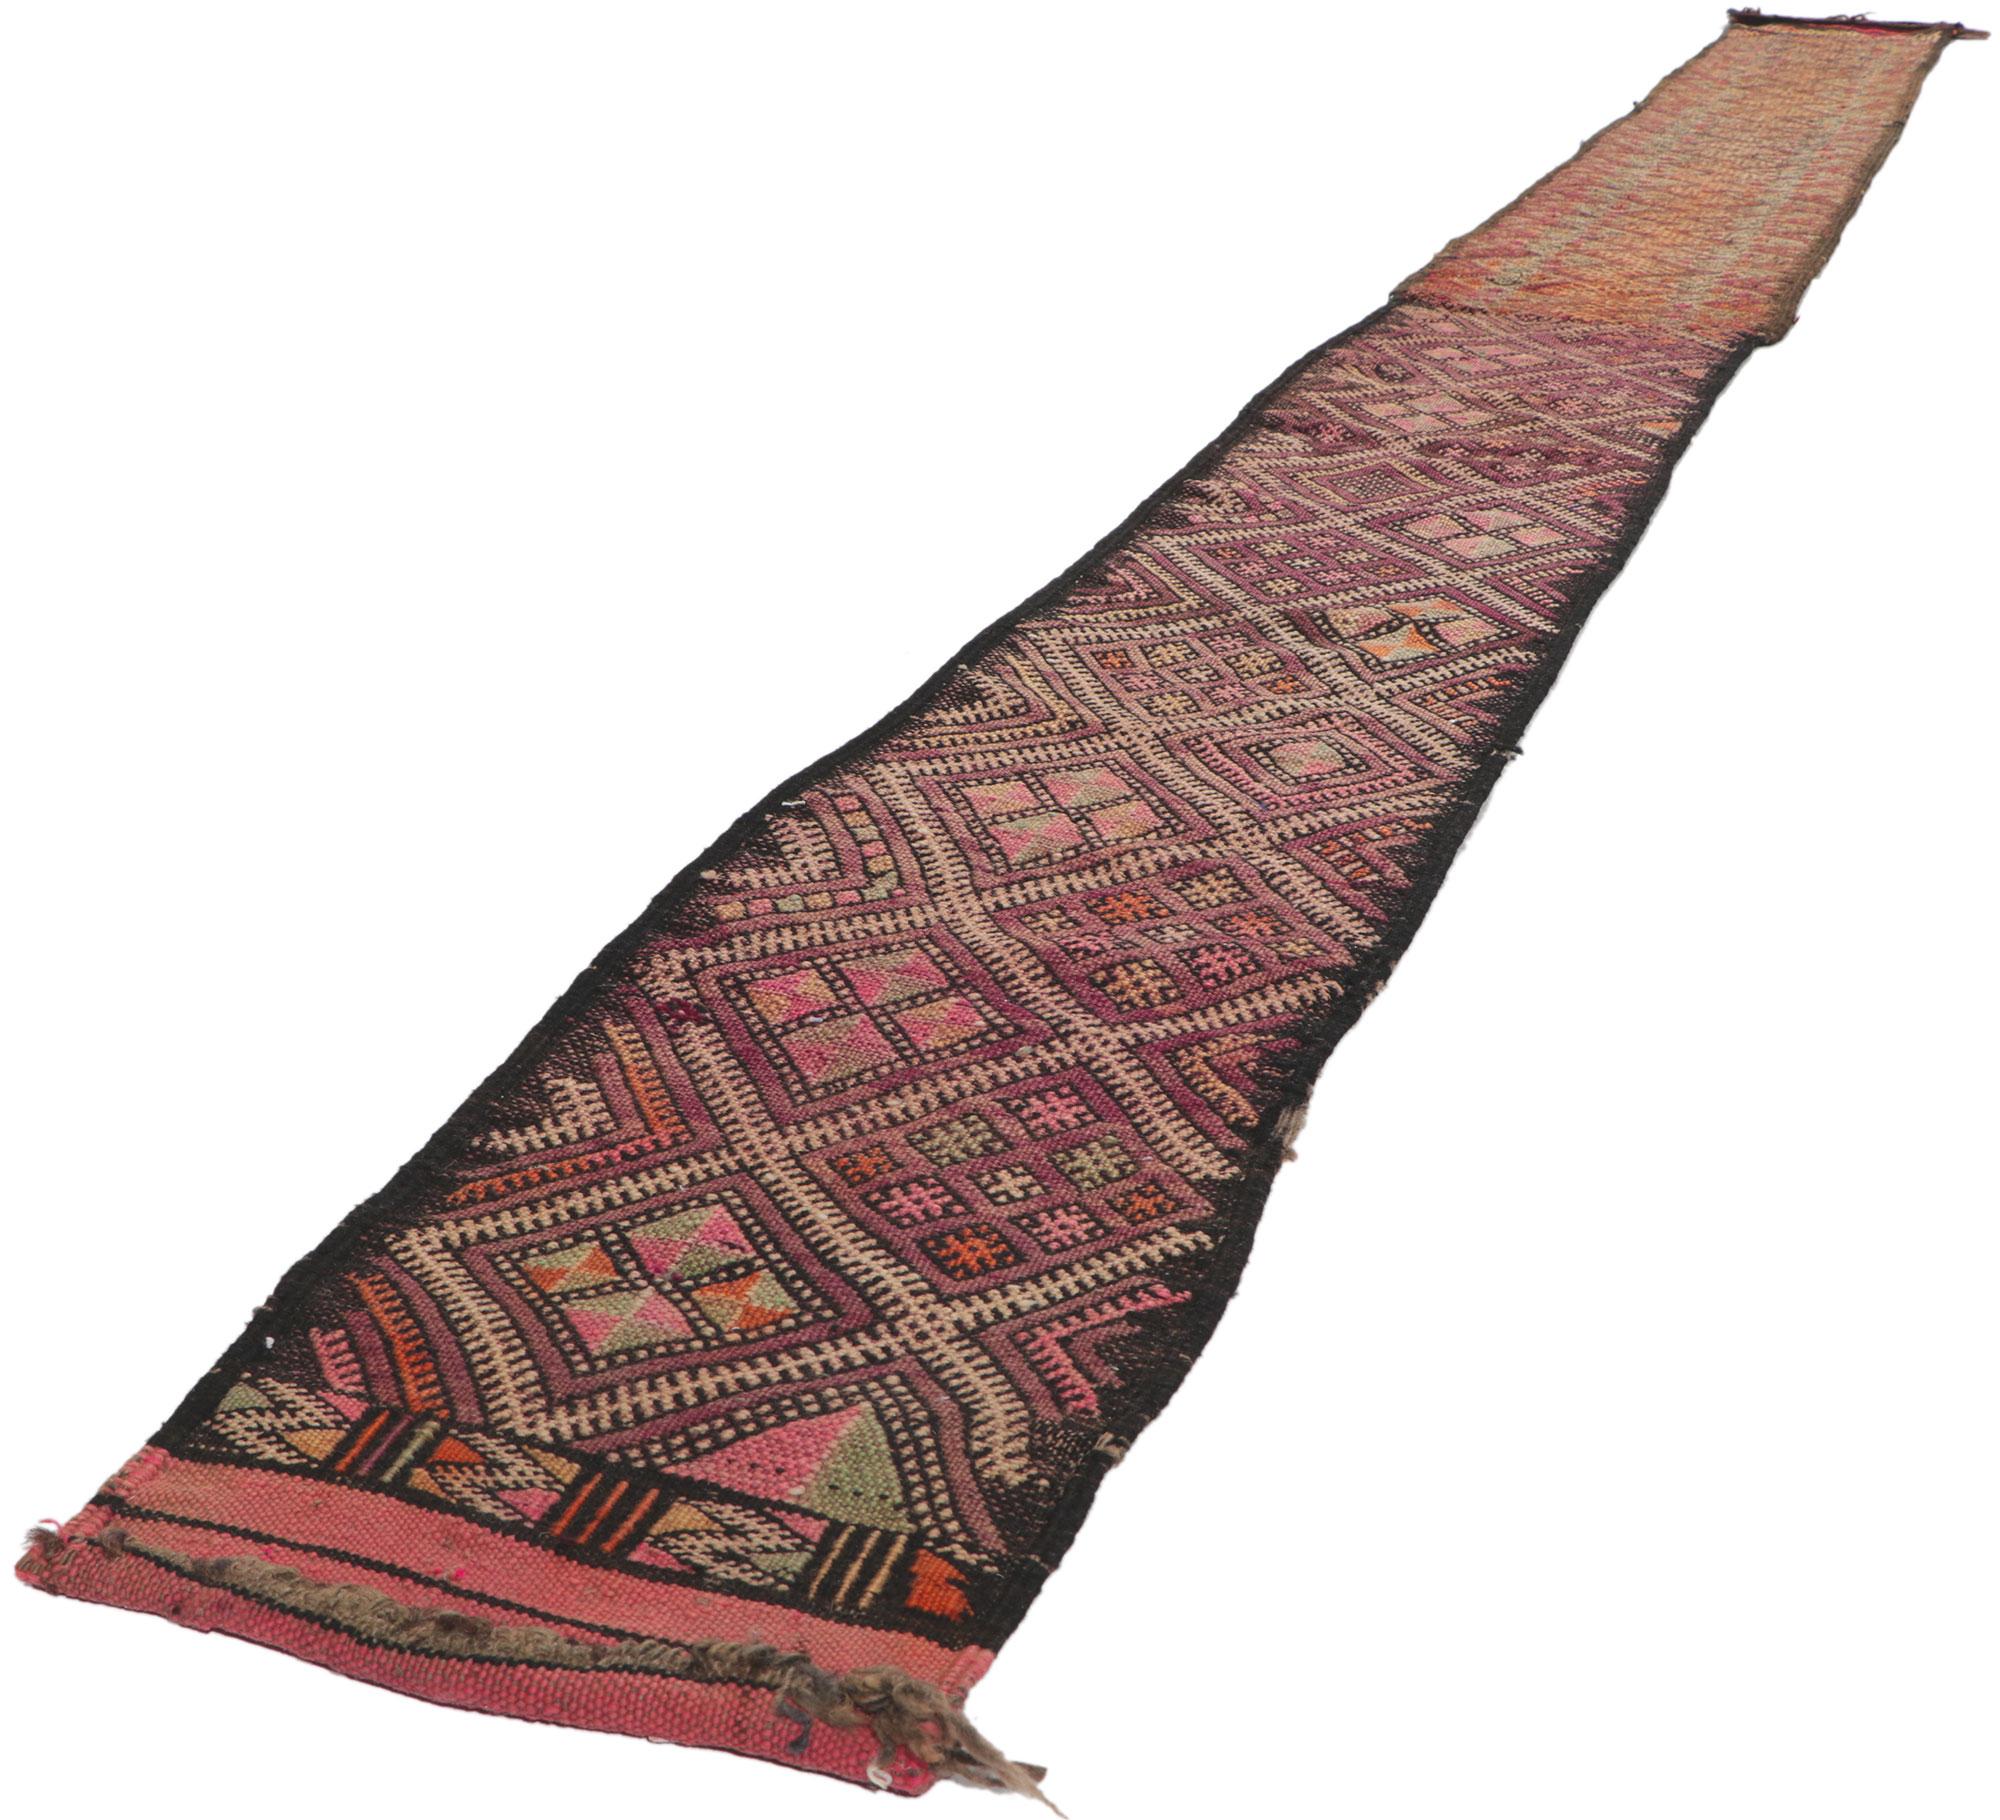 21714 Vintage Zemmour Moroccan Kilim Runner, 01'03 x 16'01. Full of tiny details and tribal style, this hand-woven wool vintage Zemmour Berber Moroccan kilim rug runner is a captivating vision of woven beauty. The abrashed field is composed of